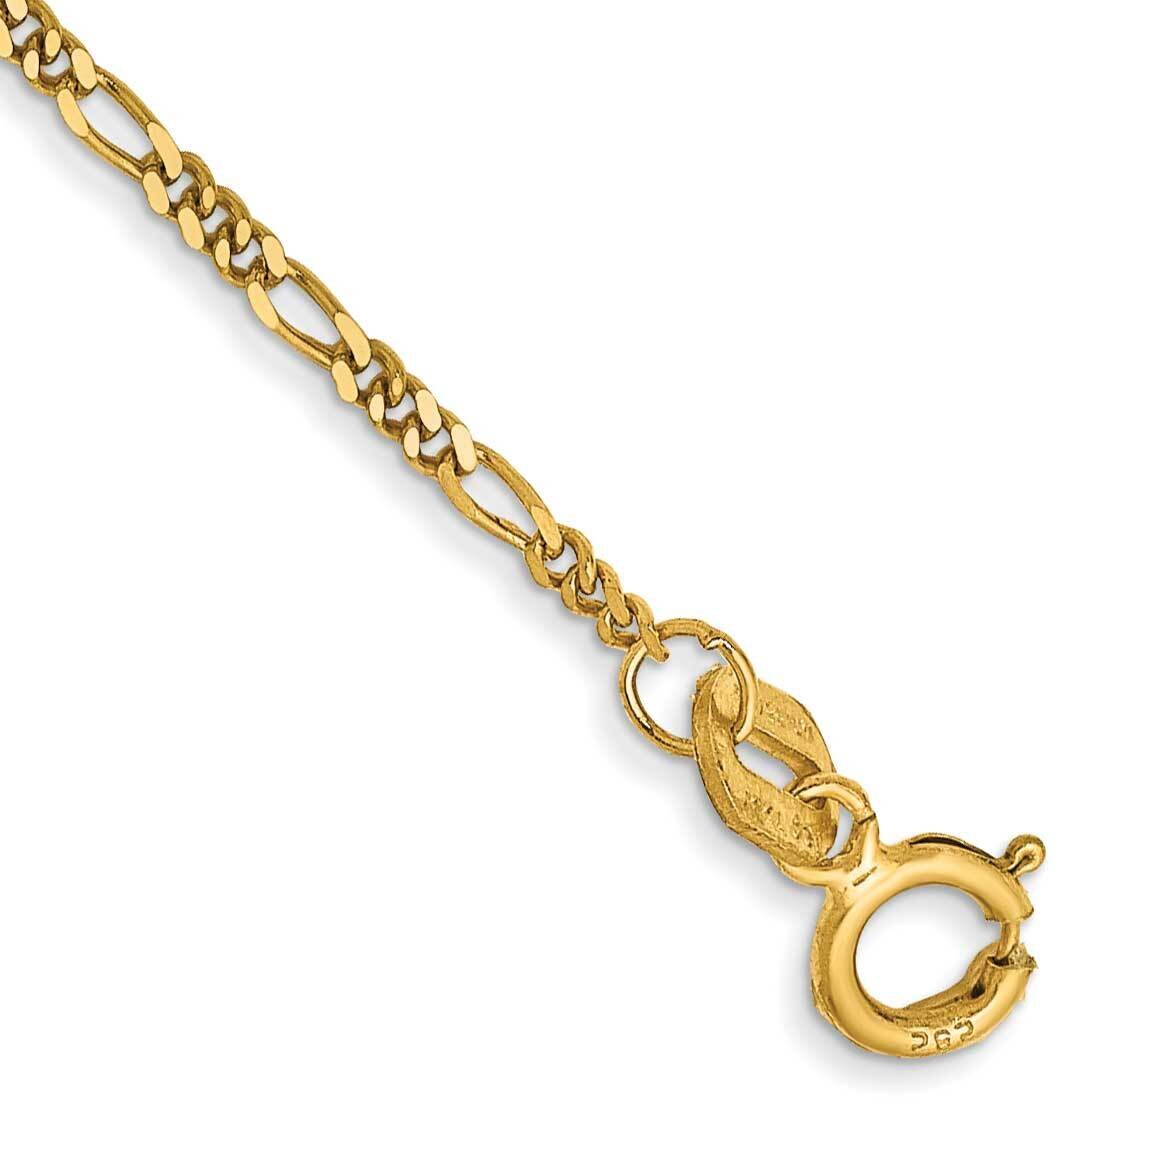 10 Inch 1.25mm Flat Figaro with Spring Ring Clasp Anklet 14k Gold PEN7-10